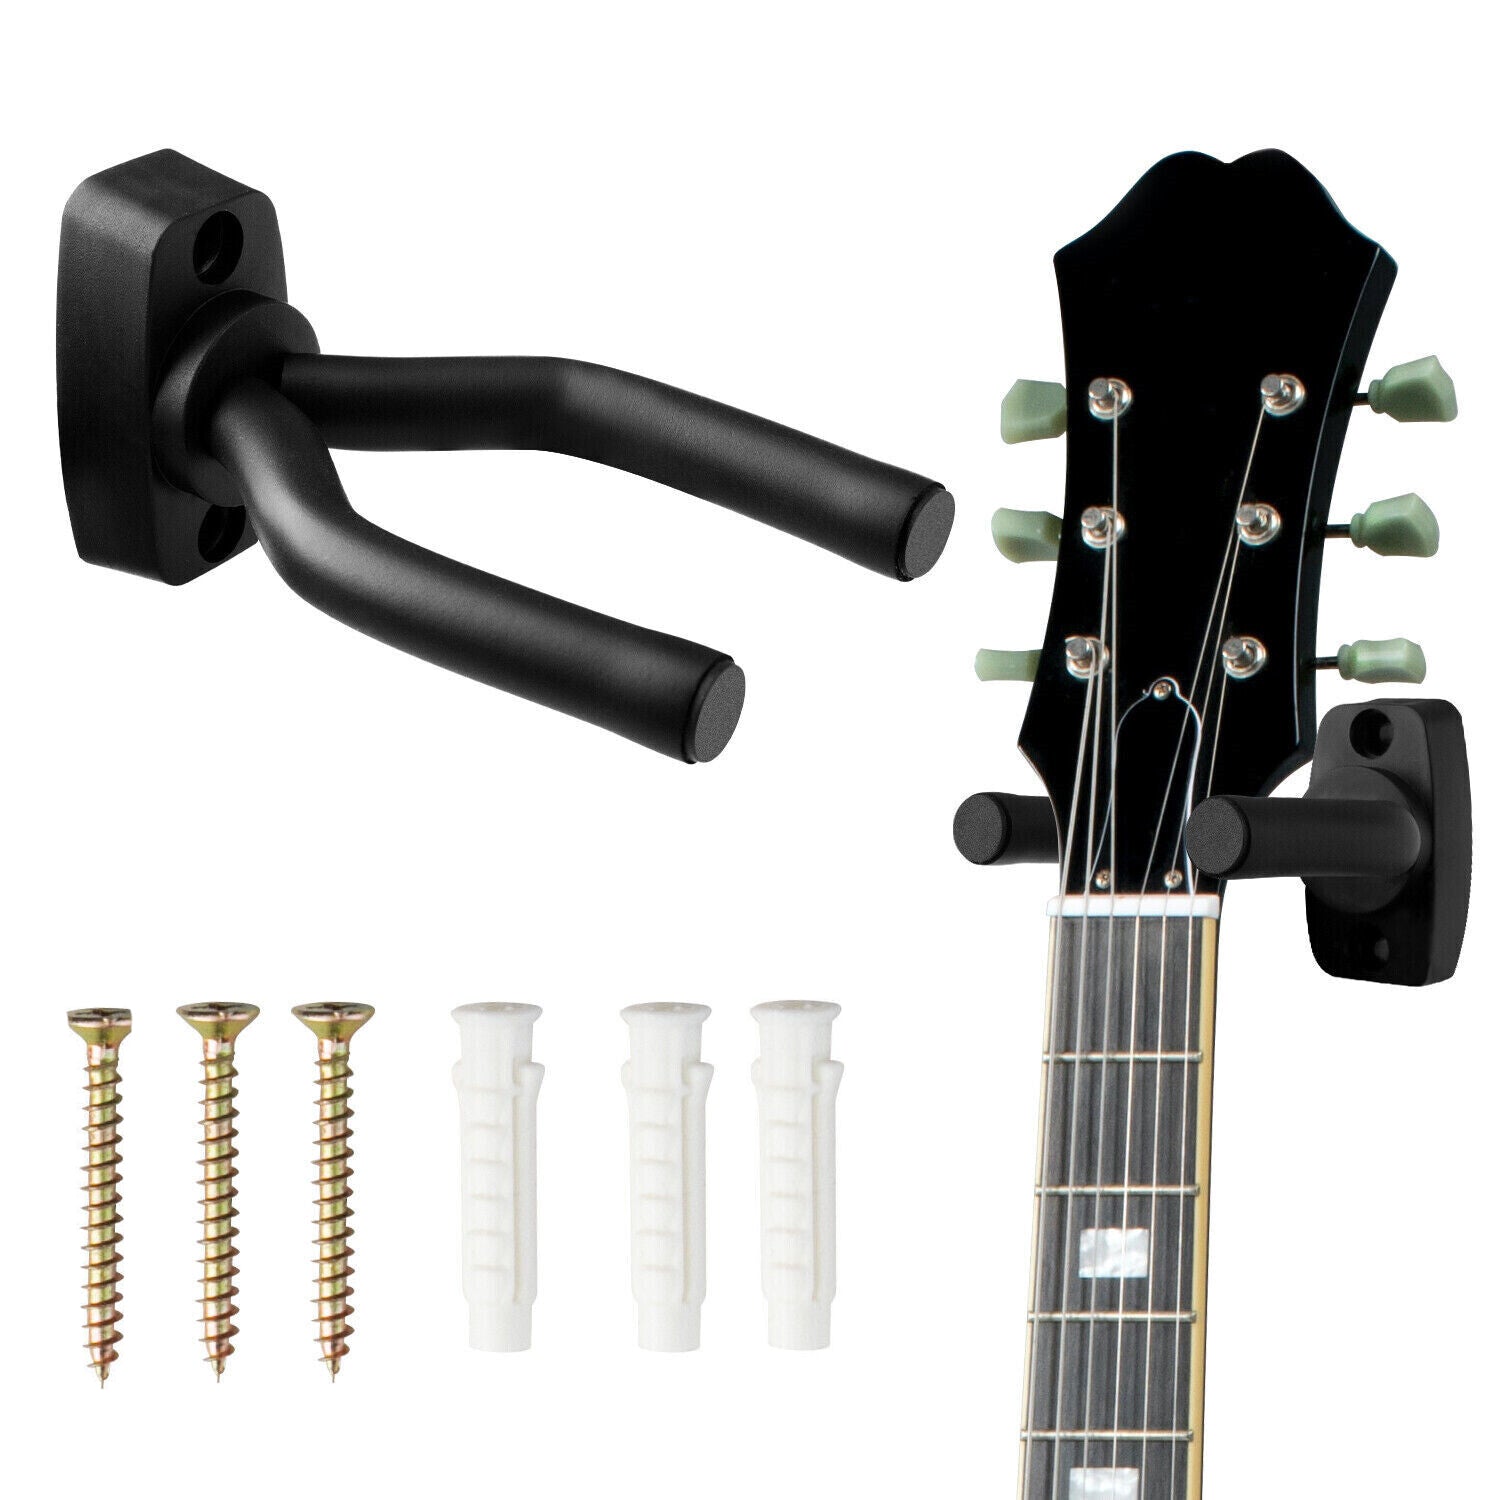 5Core Guitar Wall Mount Hangers Display Wall Hook w Screws Soft Padding Holder for All Guitars 1/2 Pc